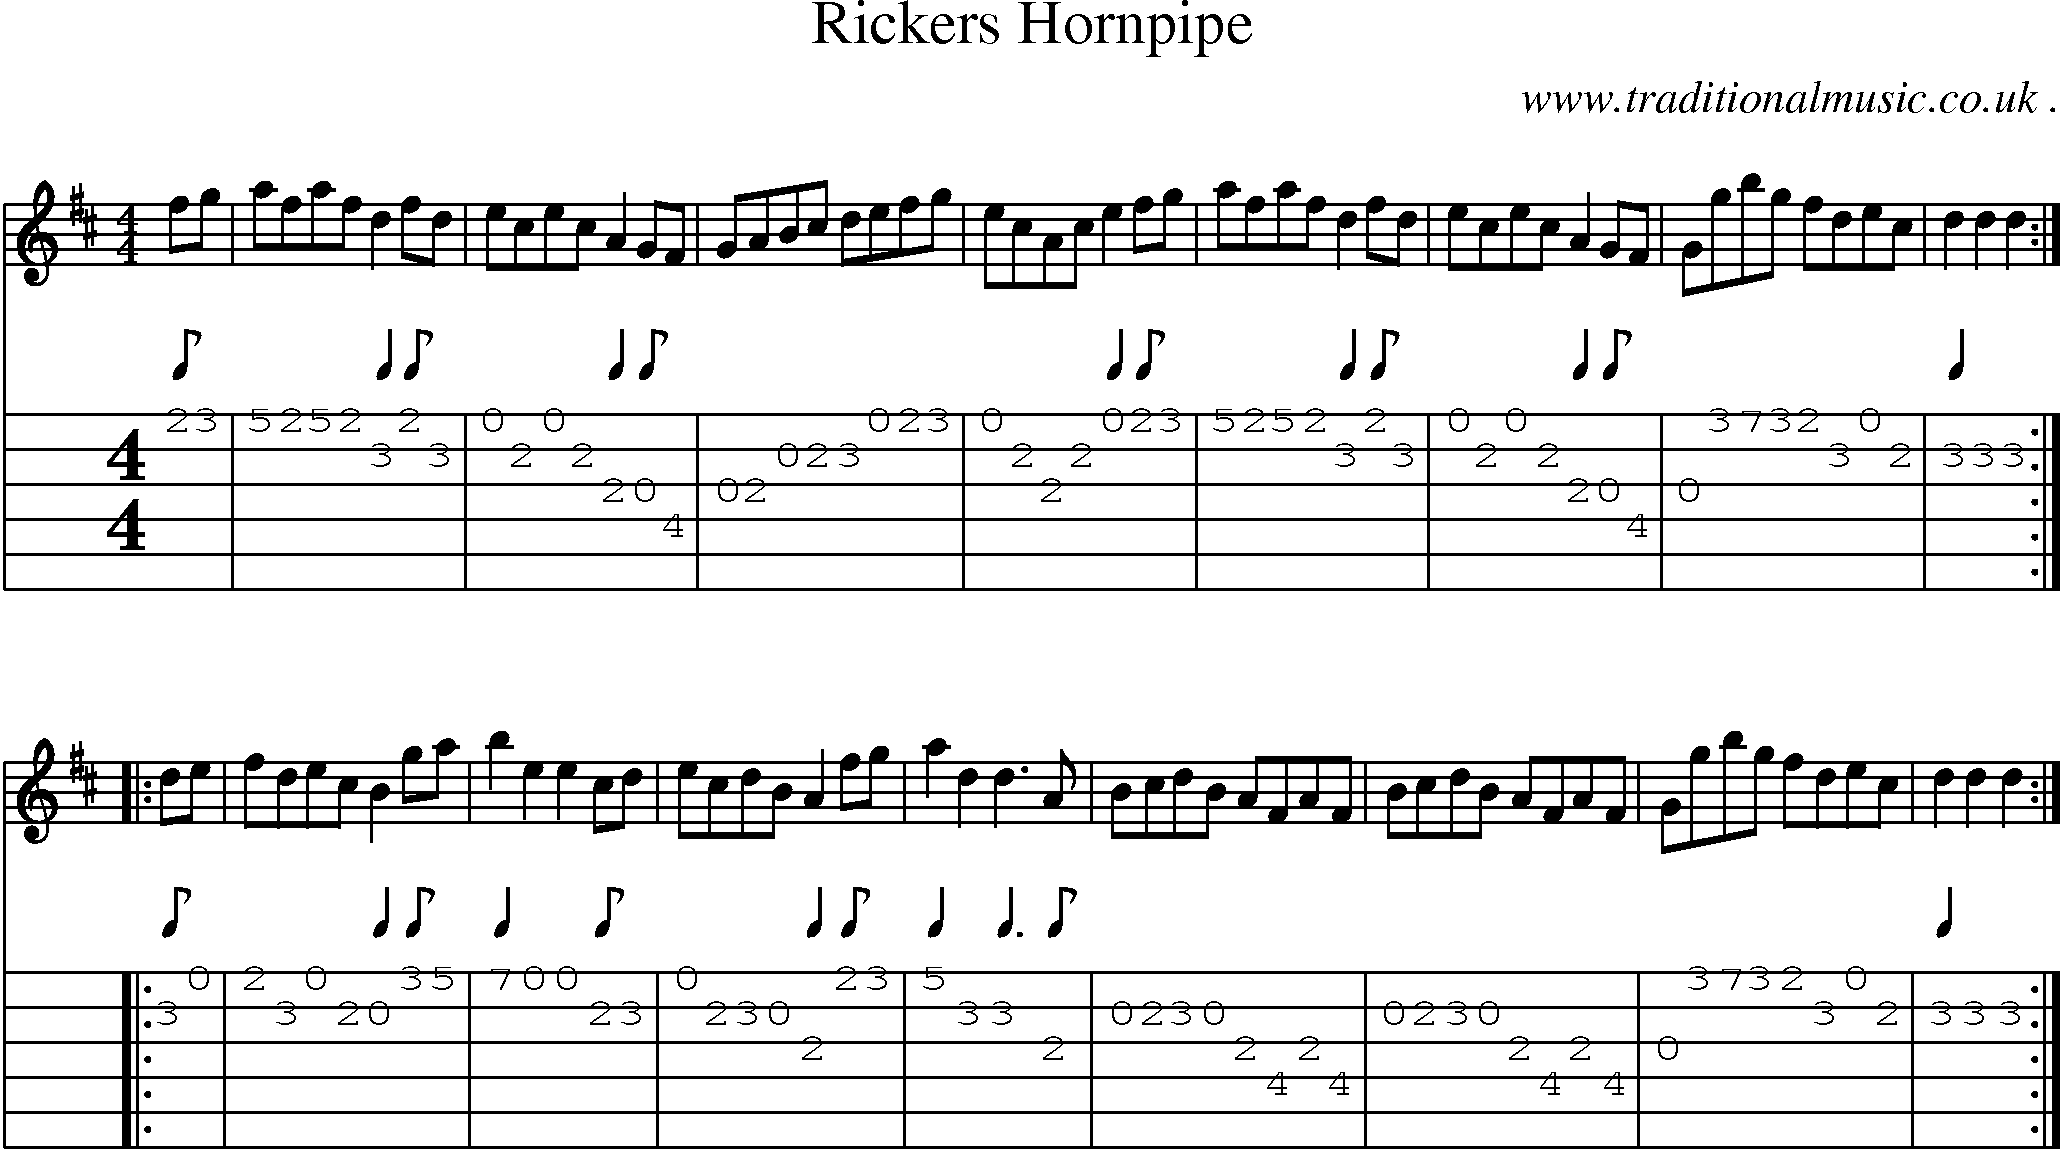 Sheet-Music and Guitar Tabs for Rickers Hornpipe